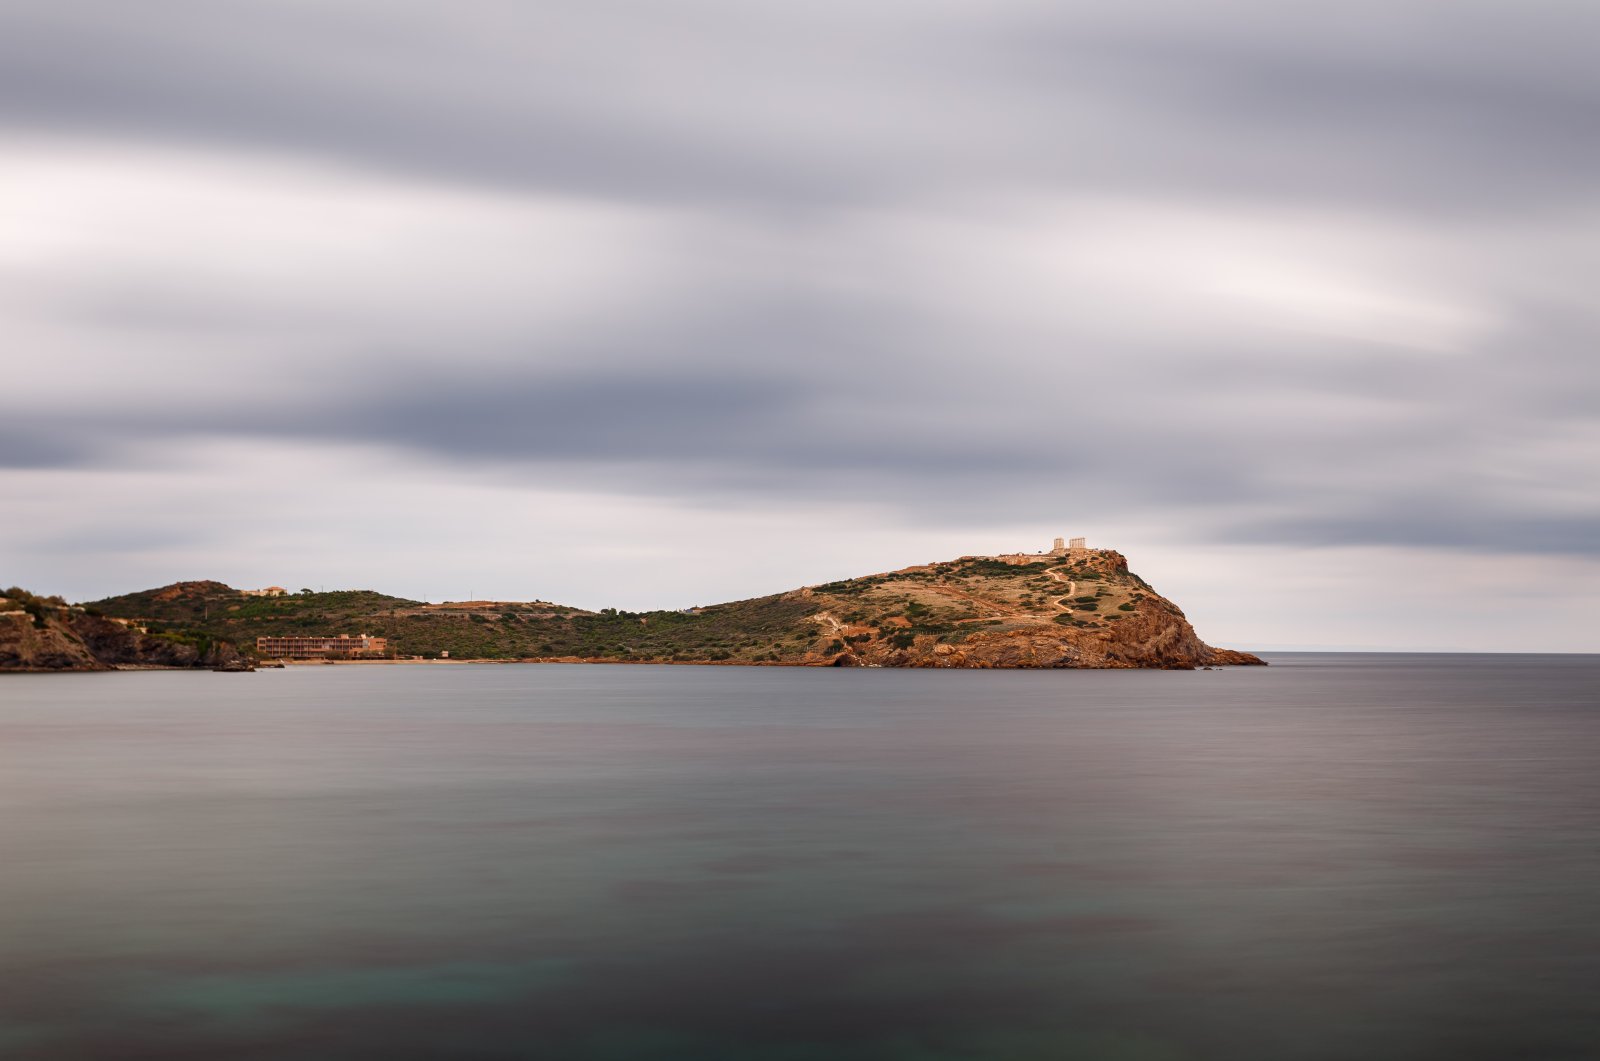 The Temple of Poseidon at Sounio, Greece against a cloudy sky, shot taken from across the bay, in this undated file photo. (Shutterstock File Photo)